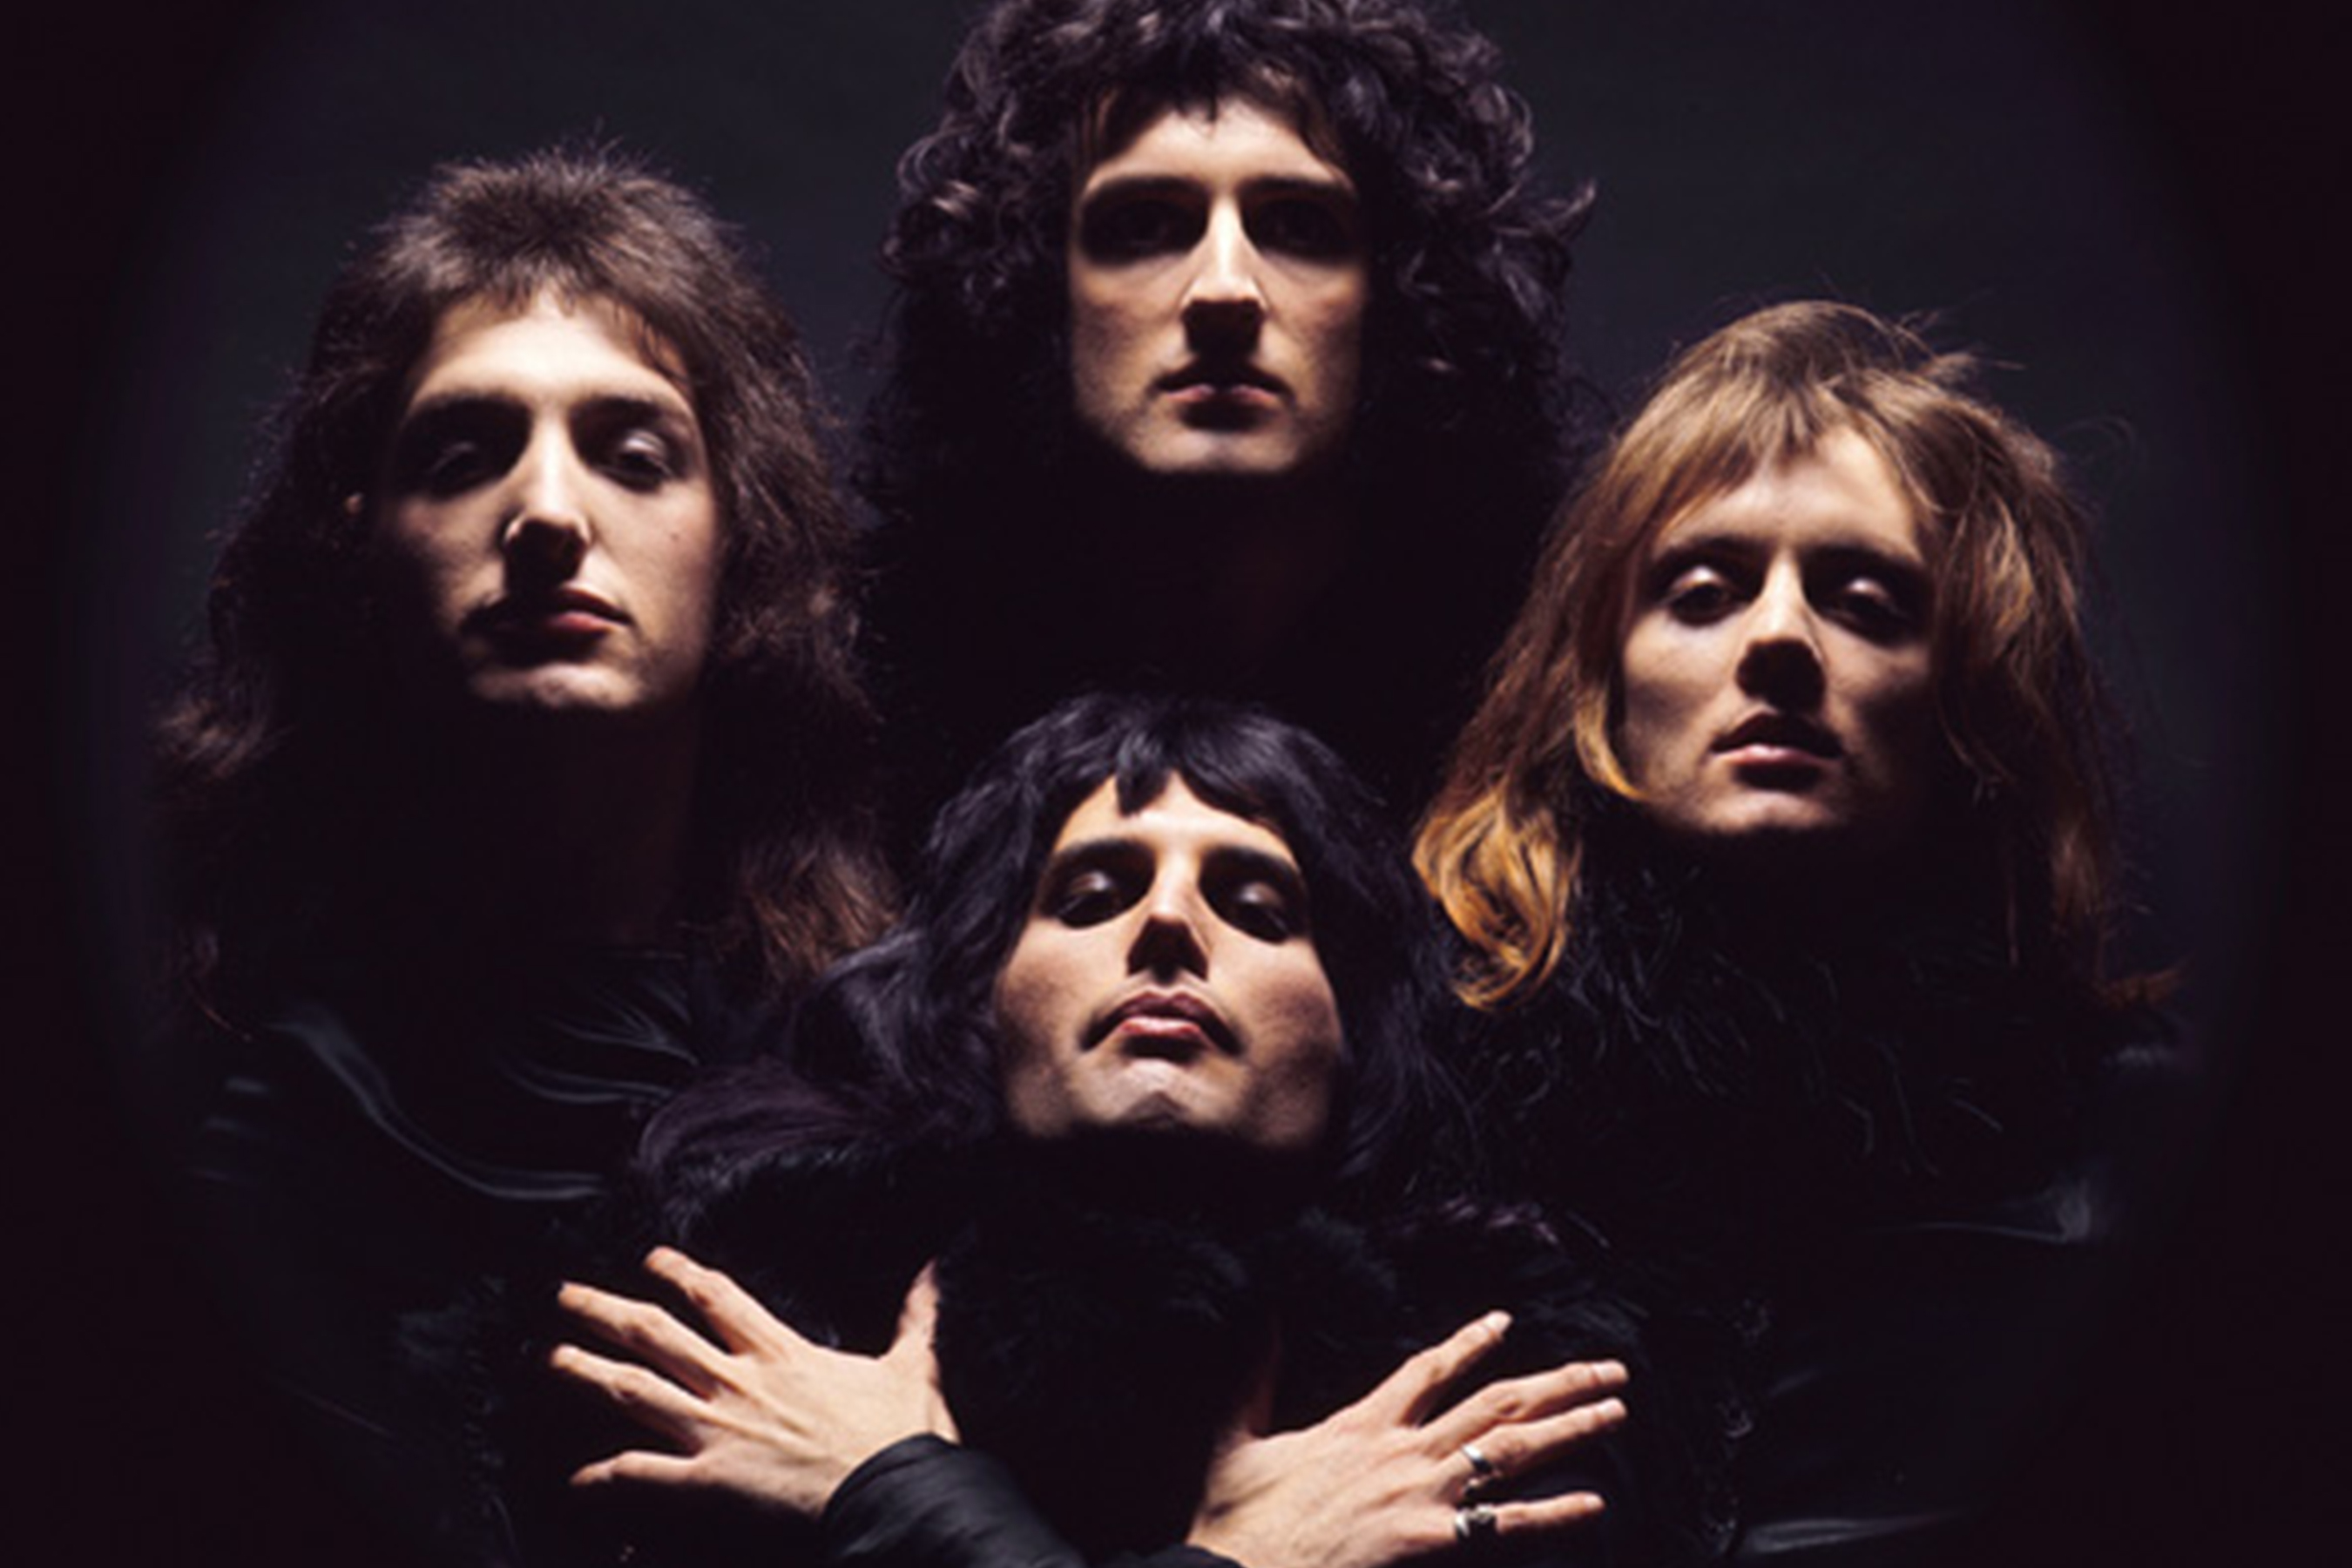 biography of queen the band